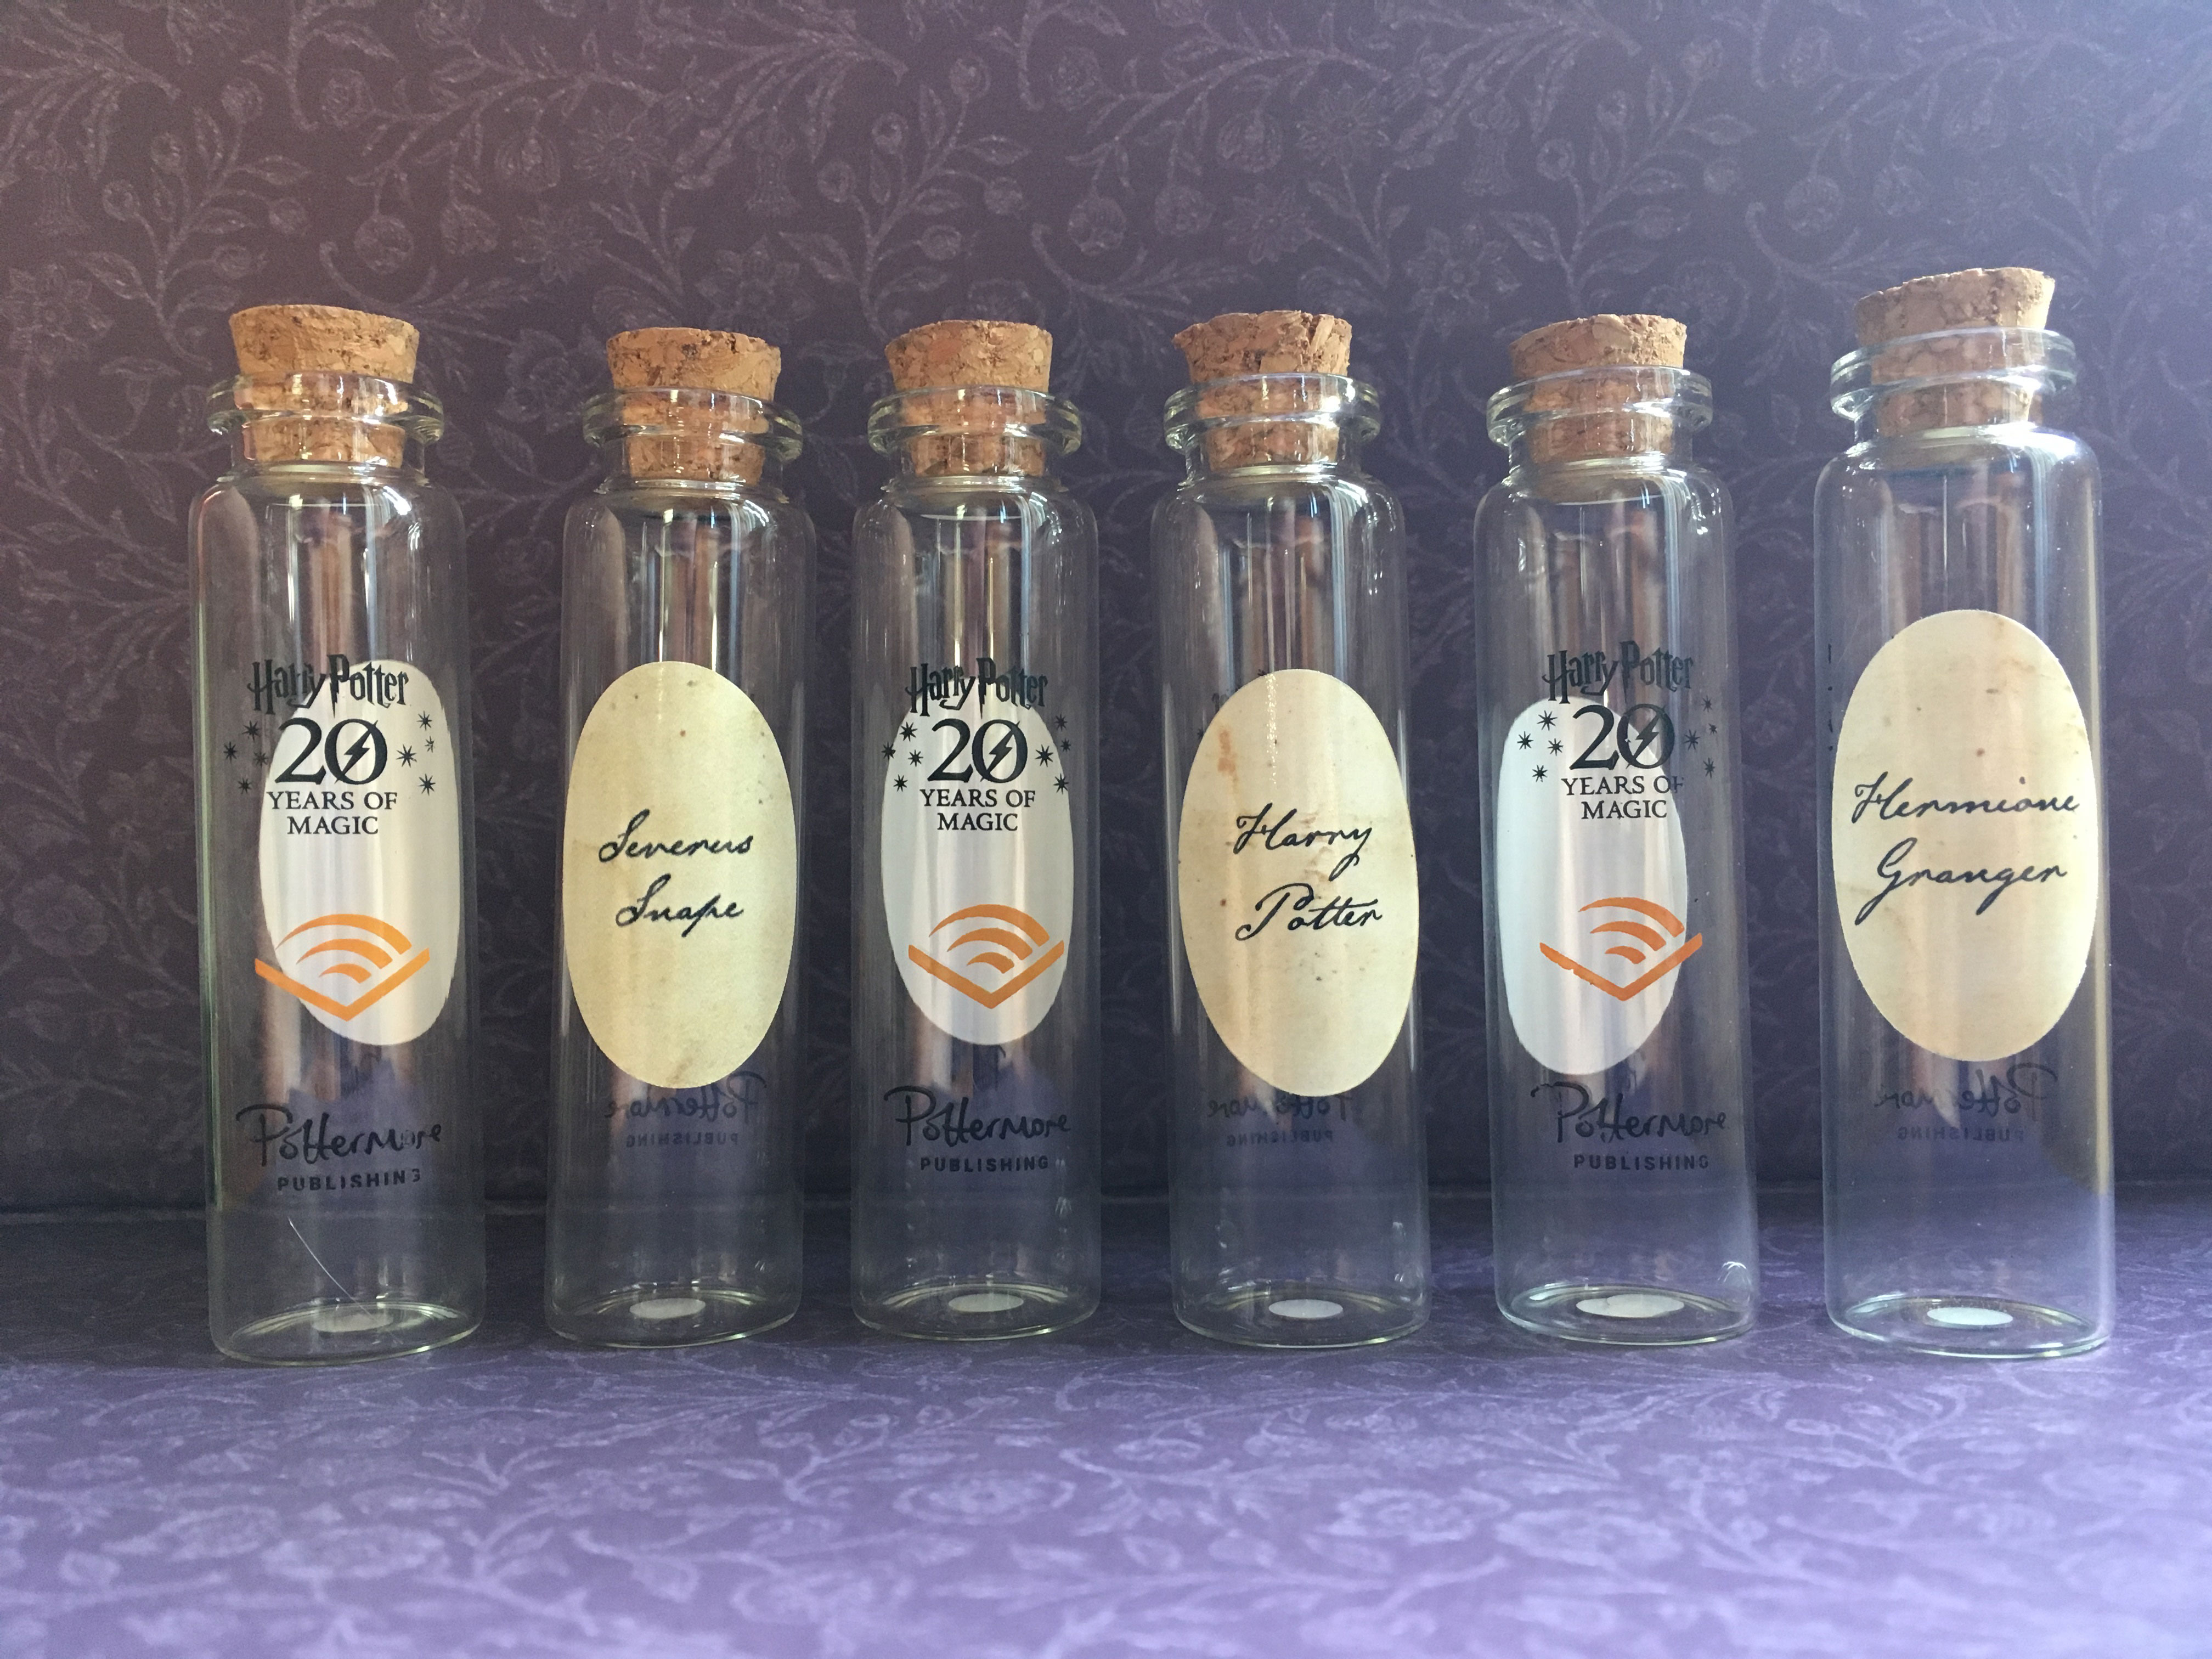 Pensieve vials from Audible’s “A Harry Potter Pensieve Experience”